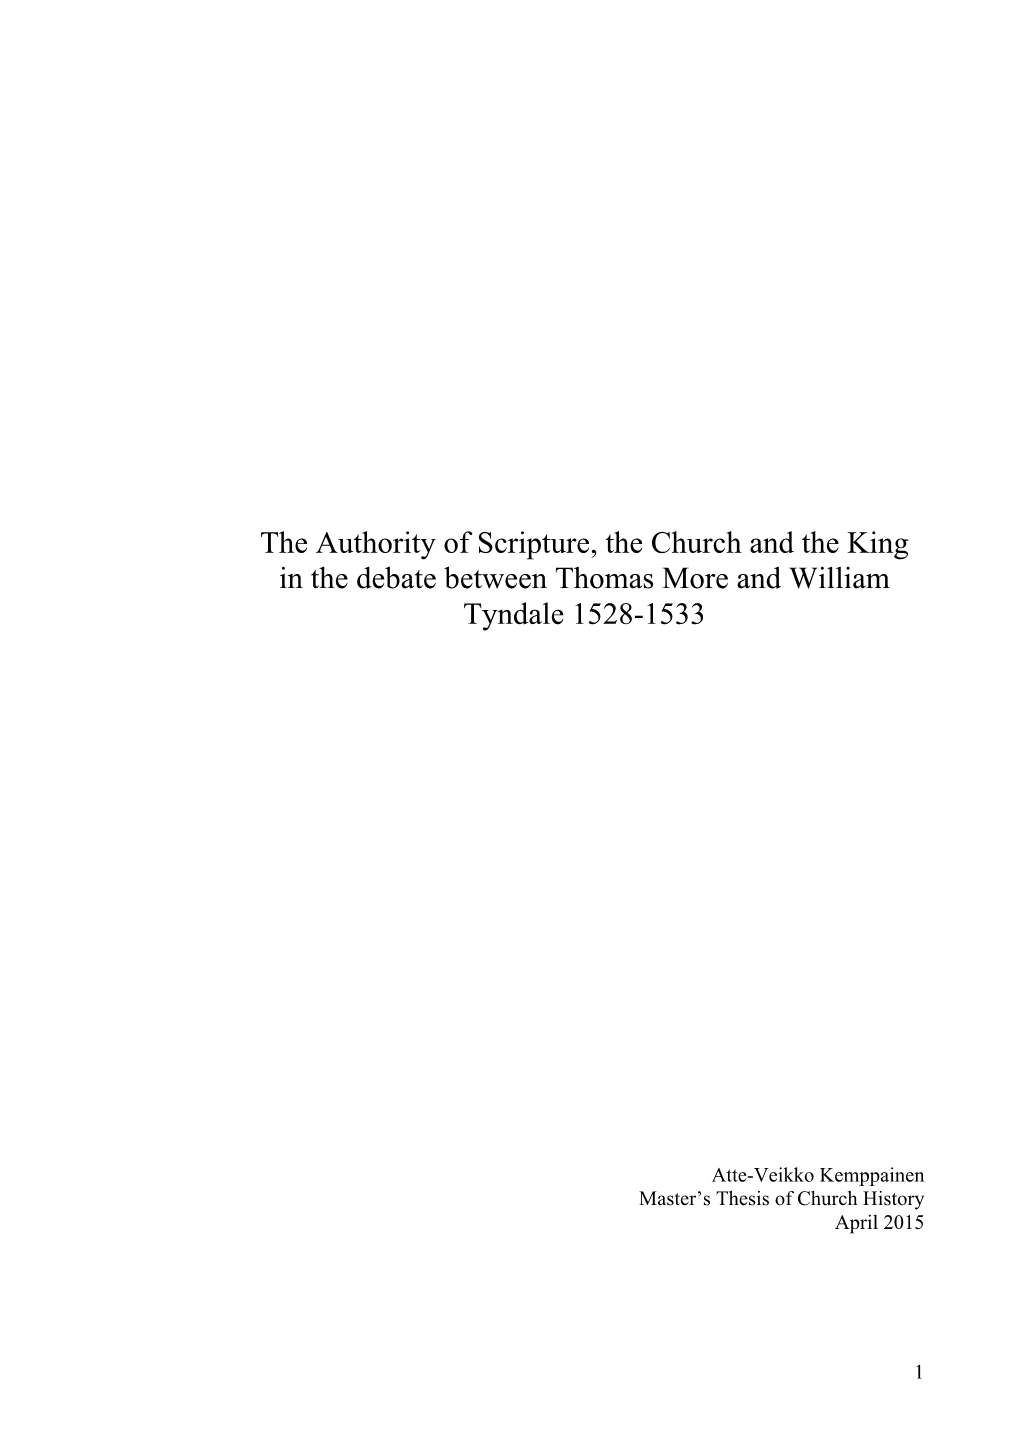 The Authority of Scripture, the Church and the King in the Debate Between Thomas More and William Tyndale 1528-1533